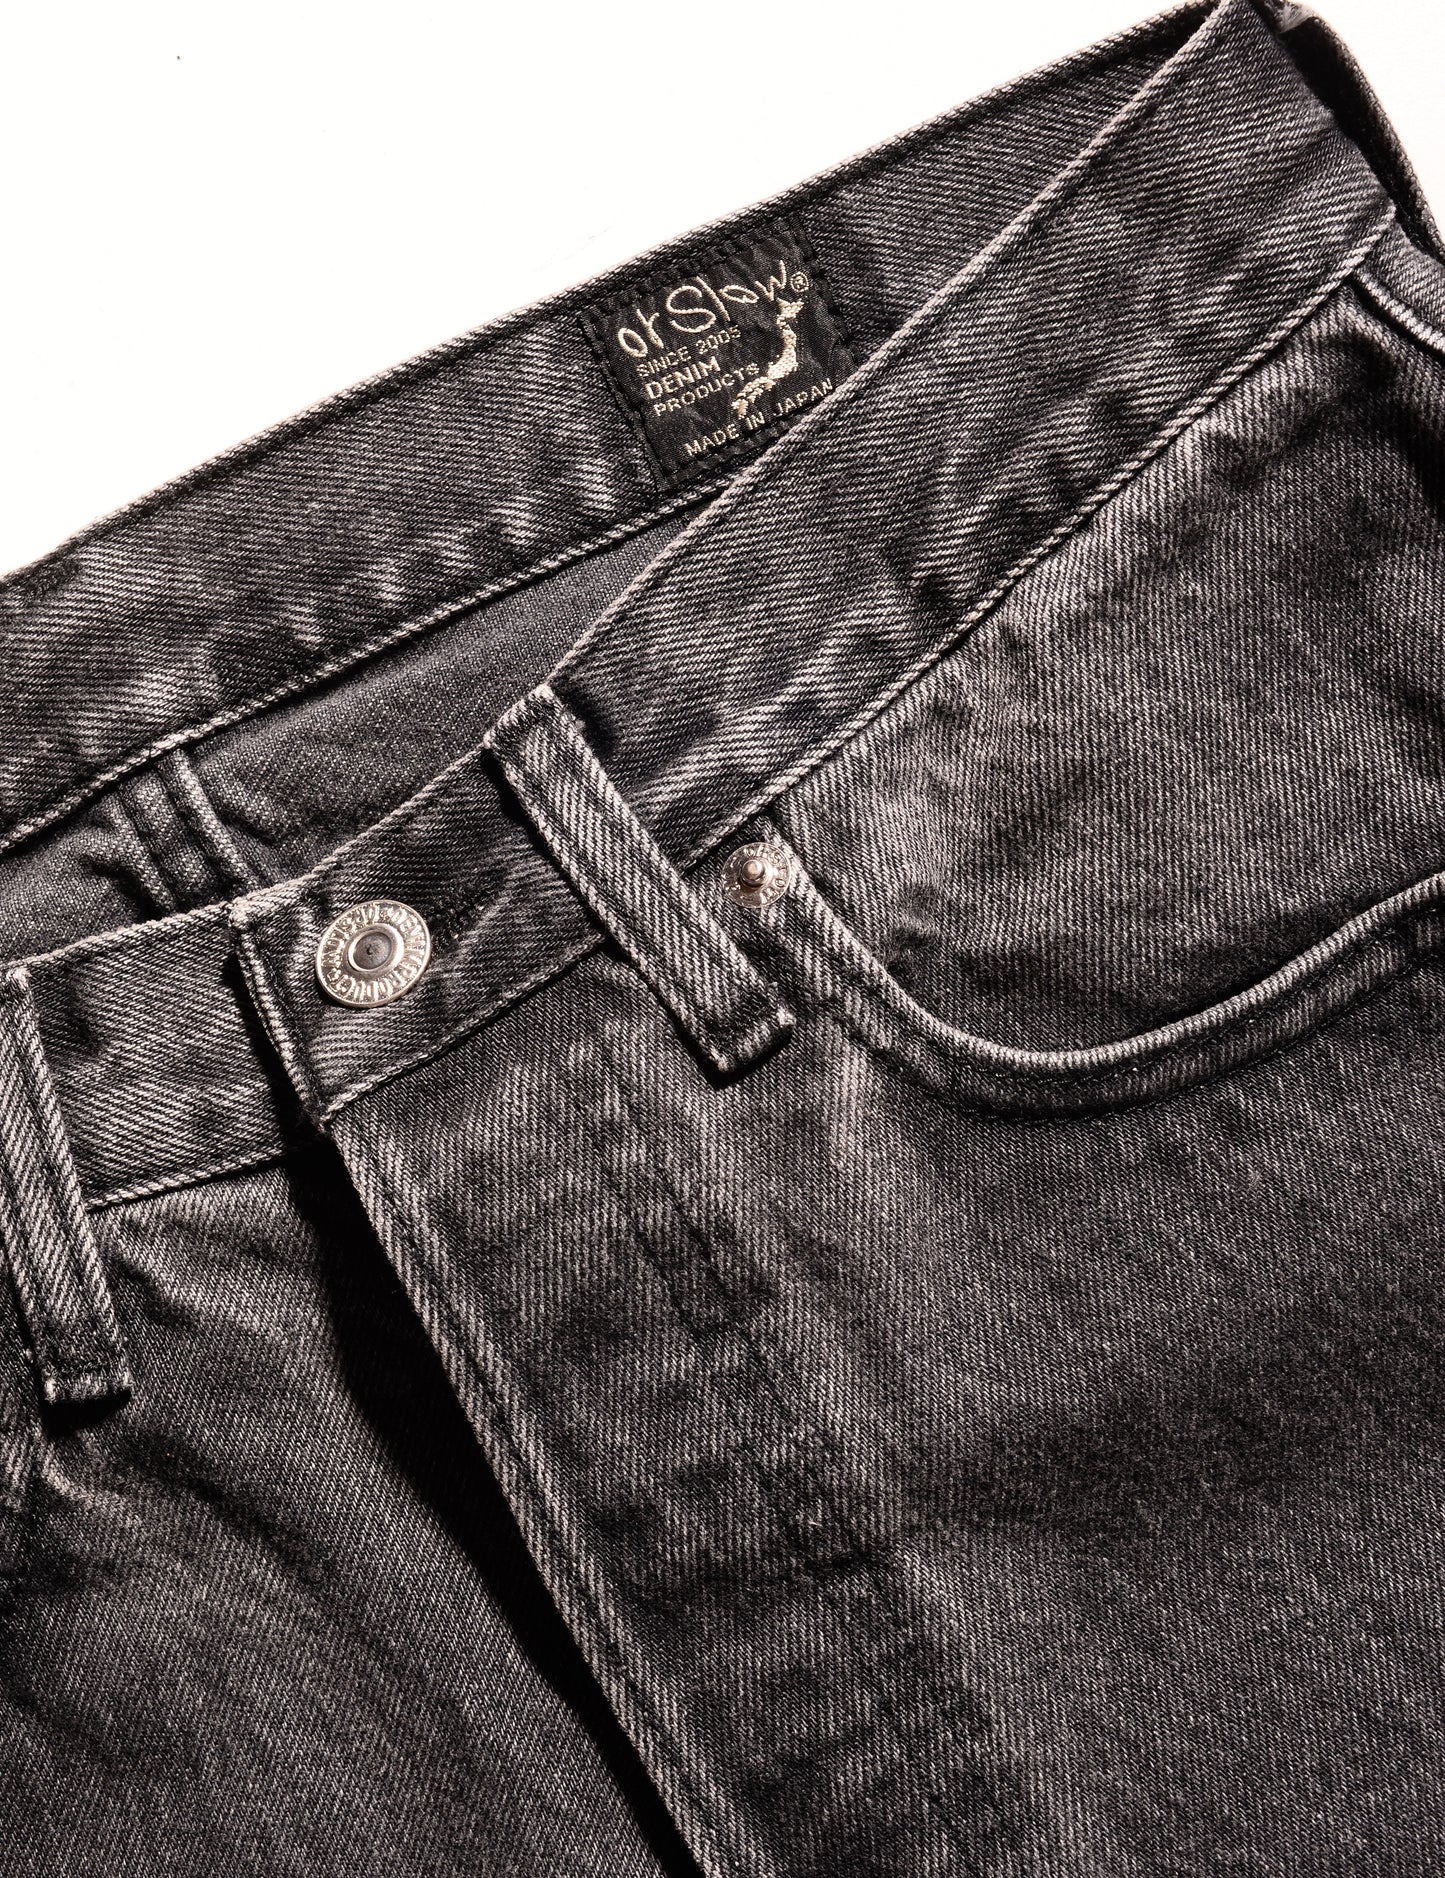 Detail of Orslow 105 Standard Fit '90s Stonewash Jeans - Black showing front button, waistband, and front pocket